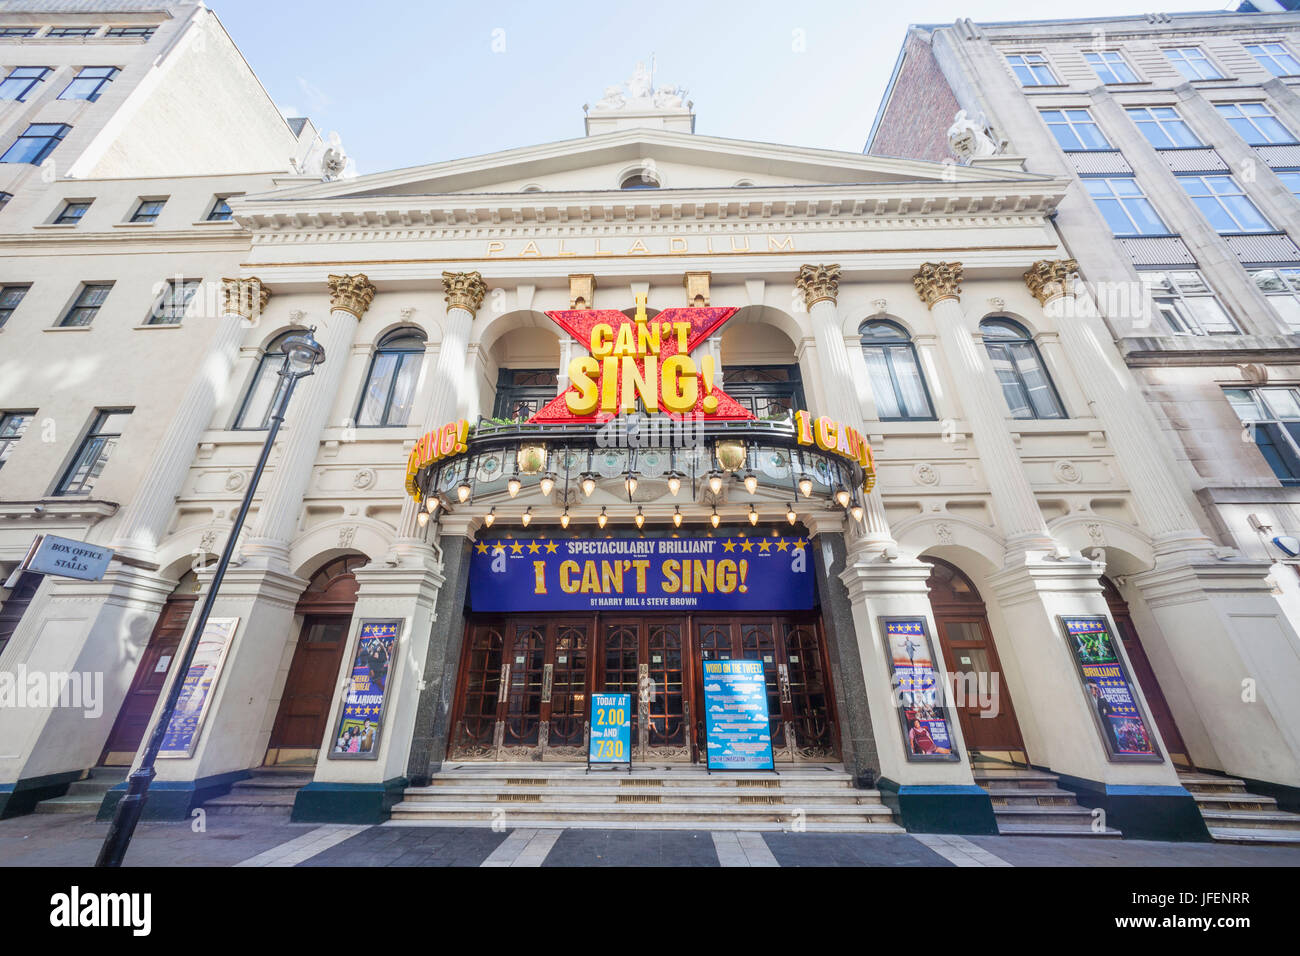 Palladium Theatre High Resolution Stock Photography and Images - Alamy